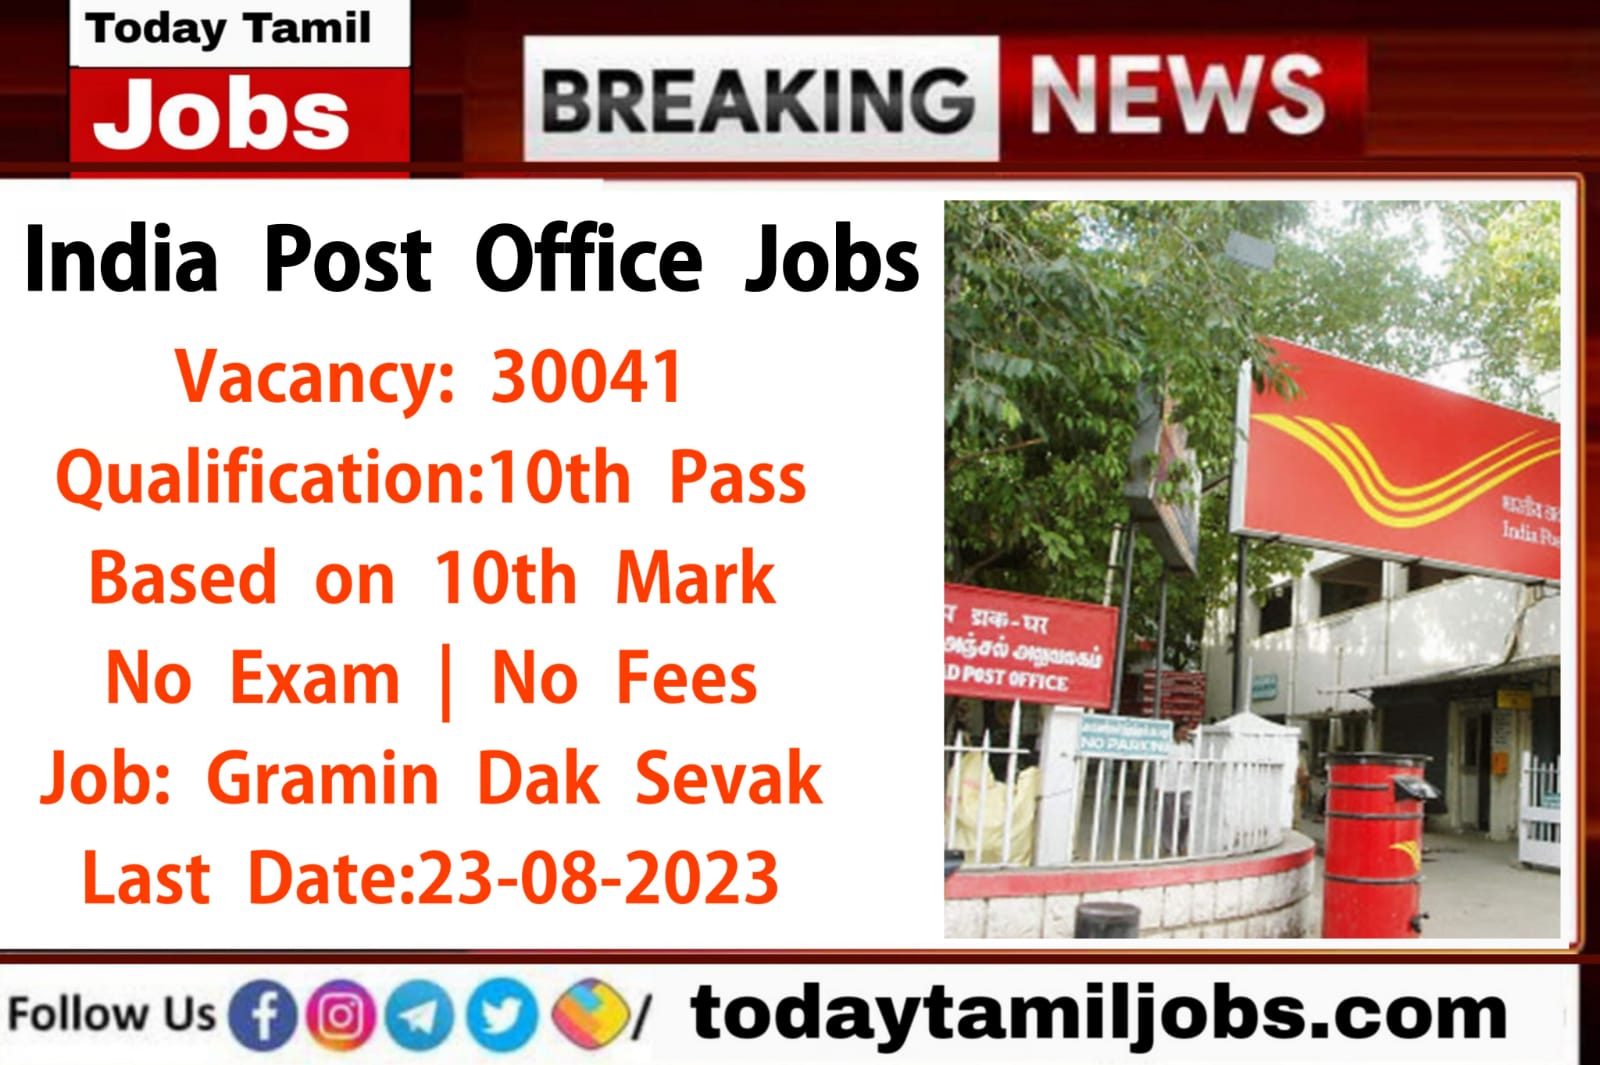 Dream Job Alert: India Post Recruitment 2023 with 30,041 Vacancies! Apply Now and Secure Your Future!